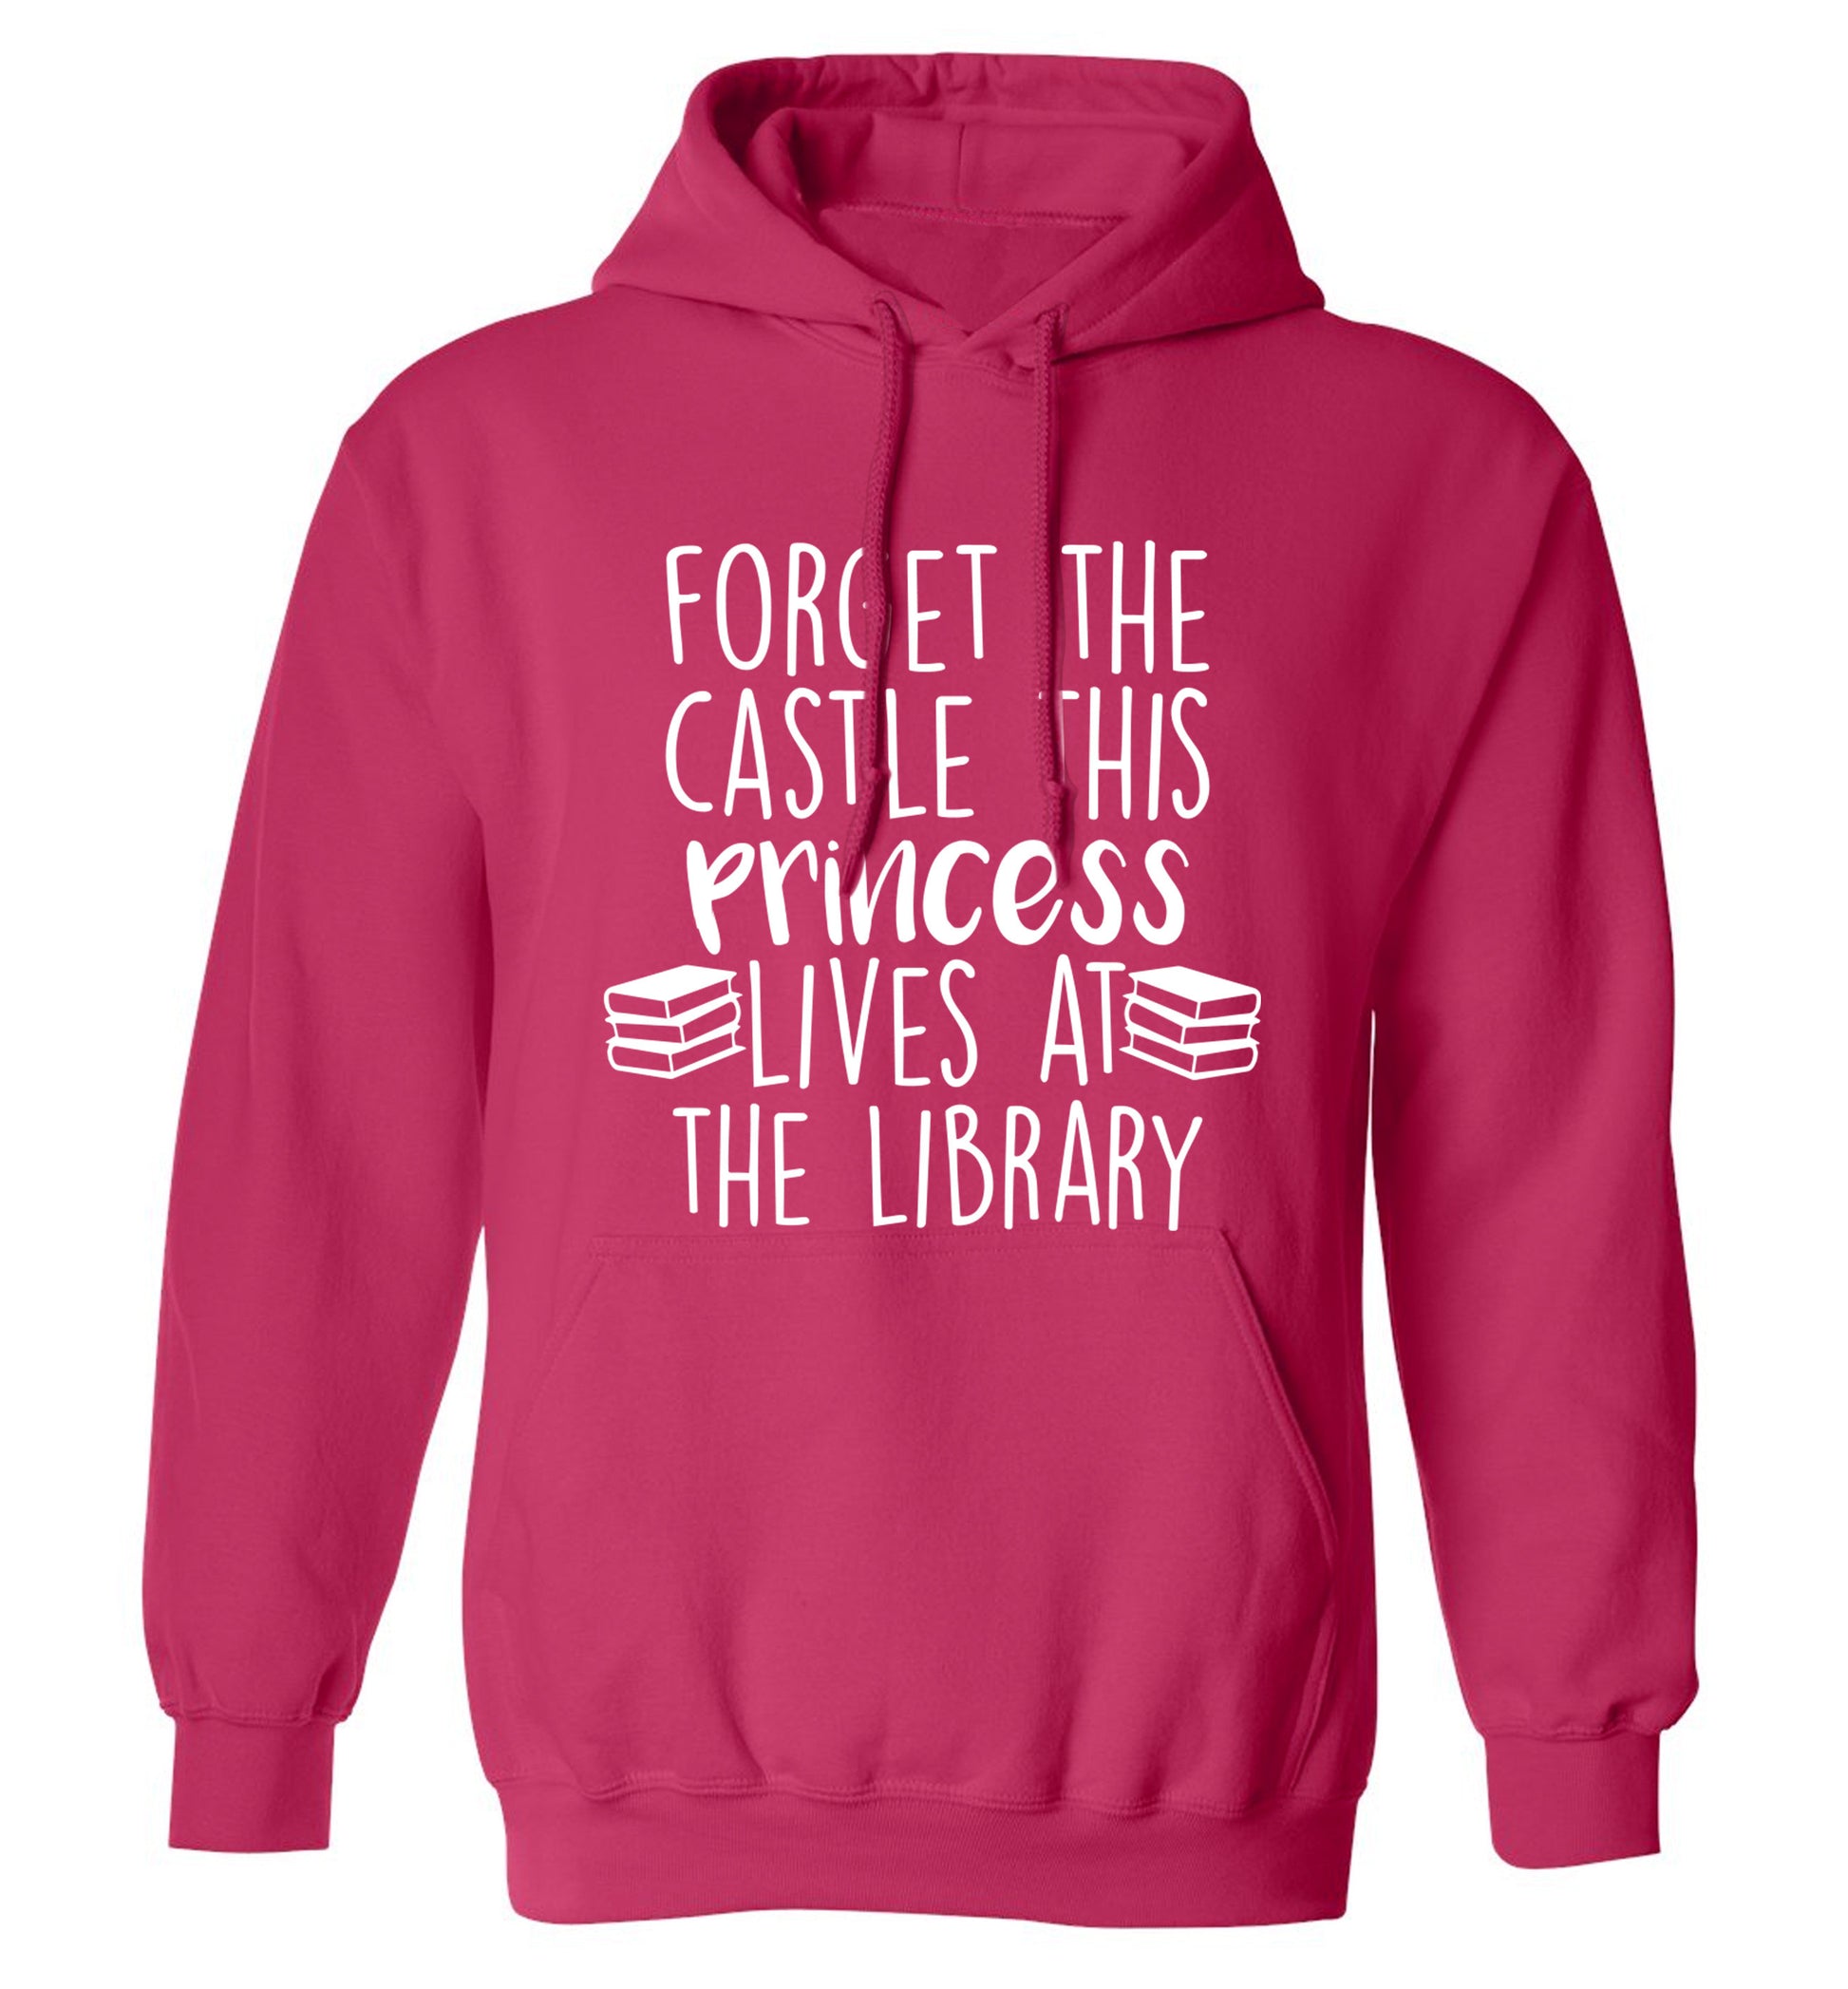 Forget the castle this princess lives at the library adults unisex pink hoodie 2XL